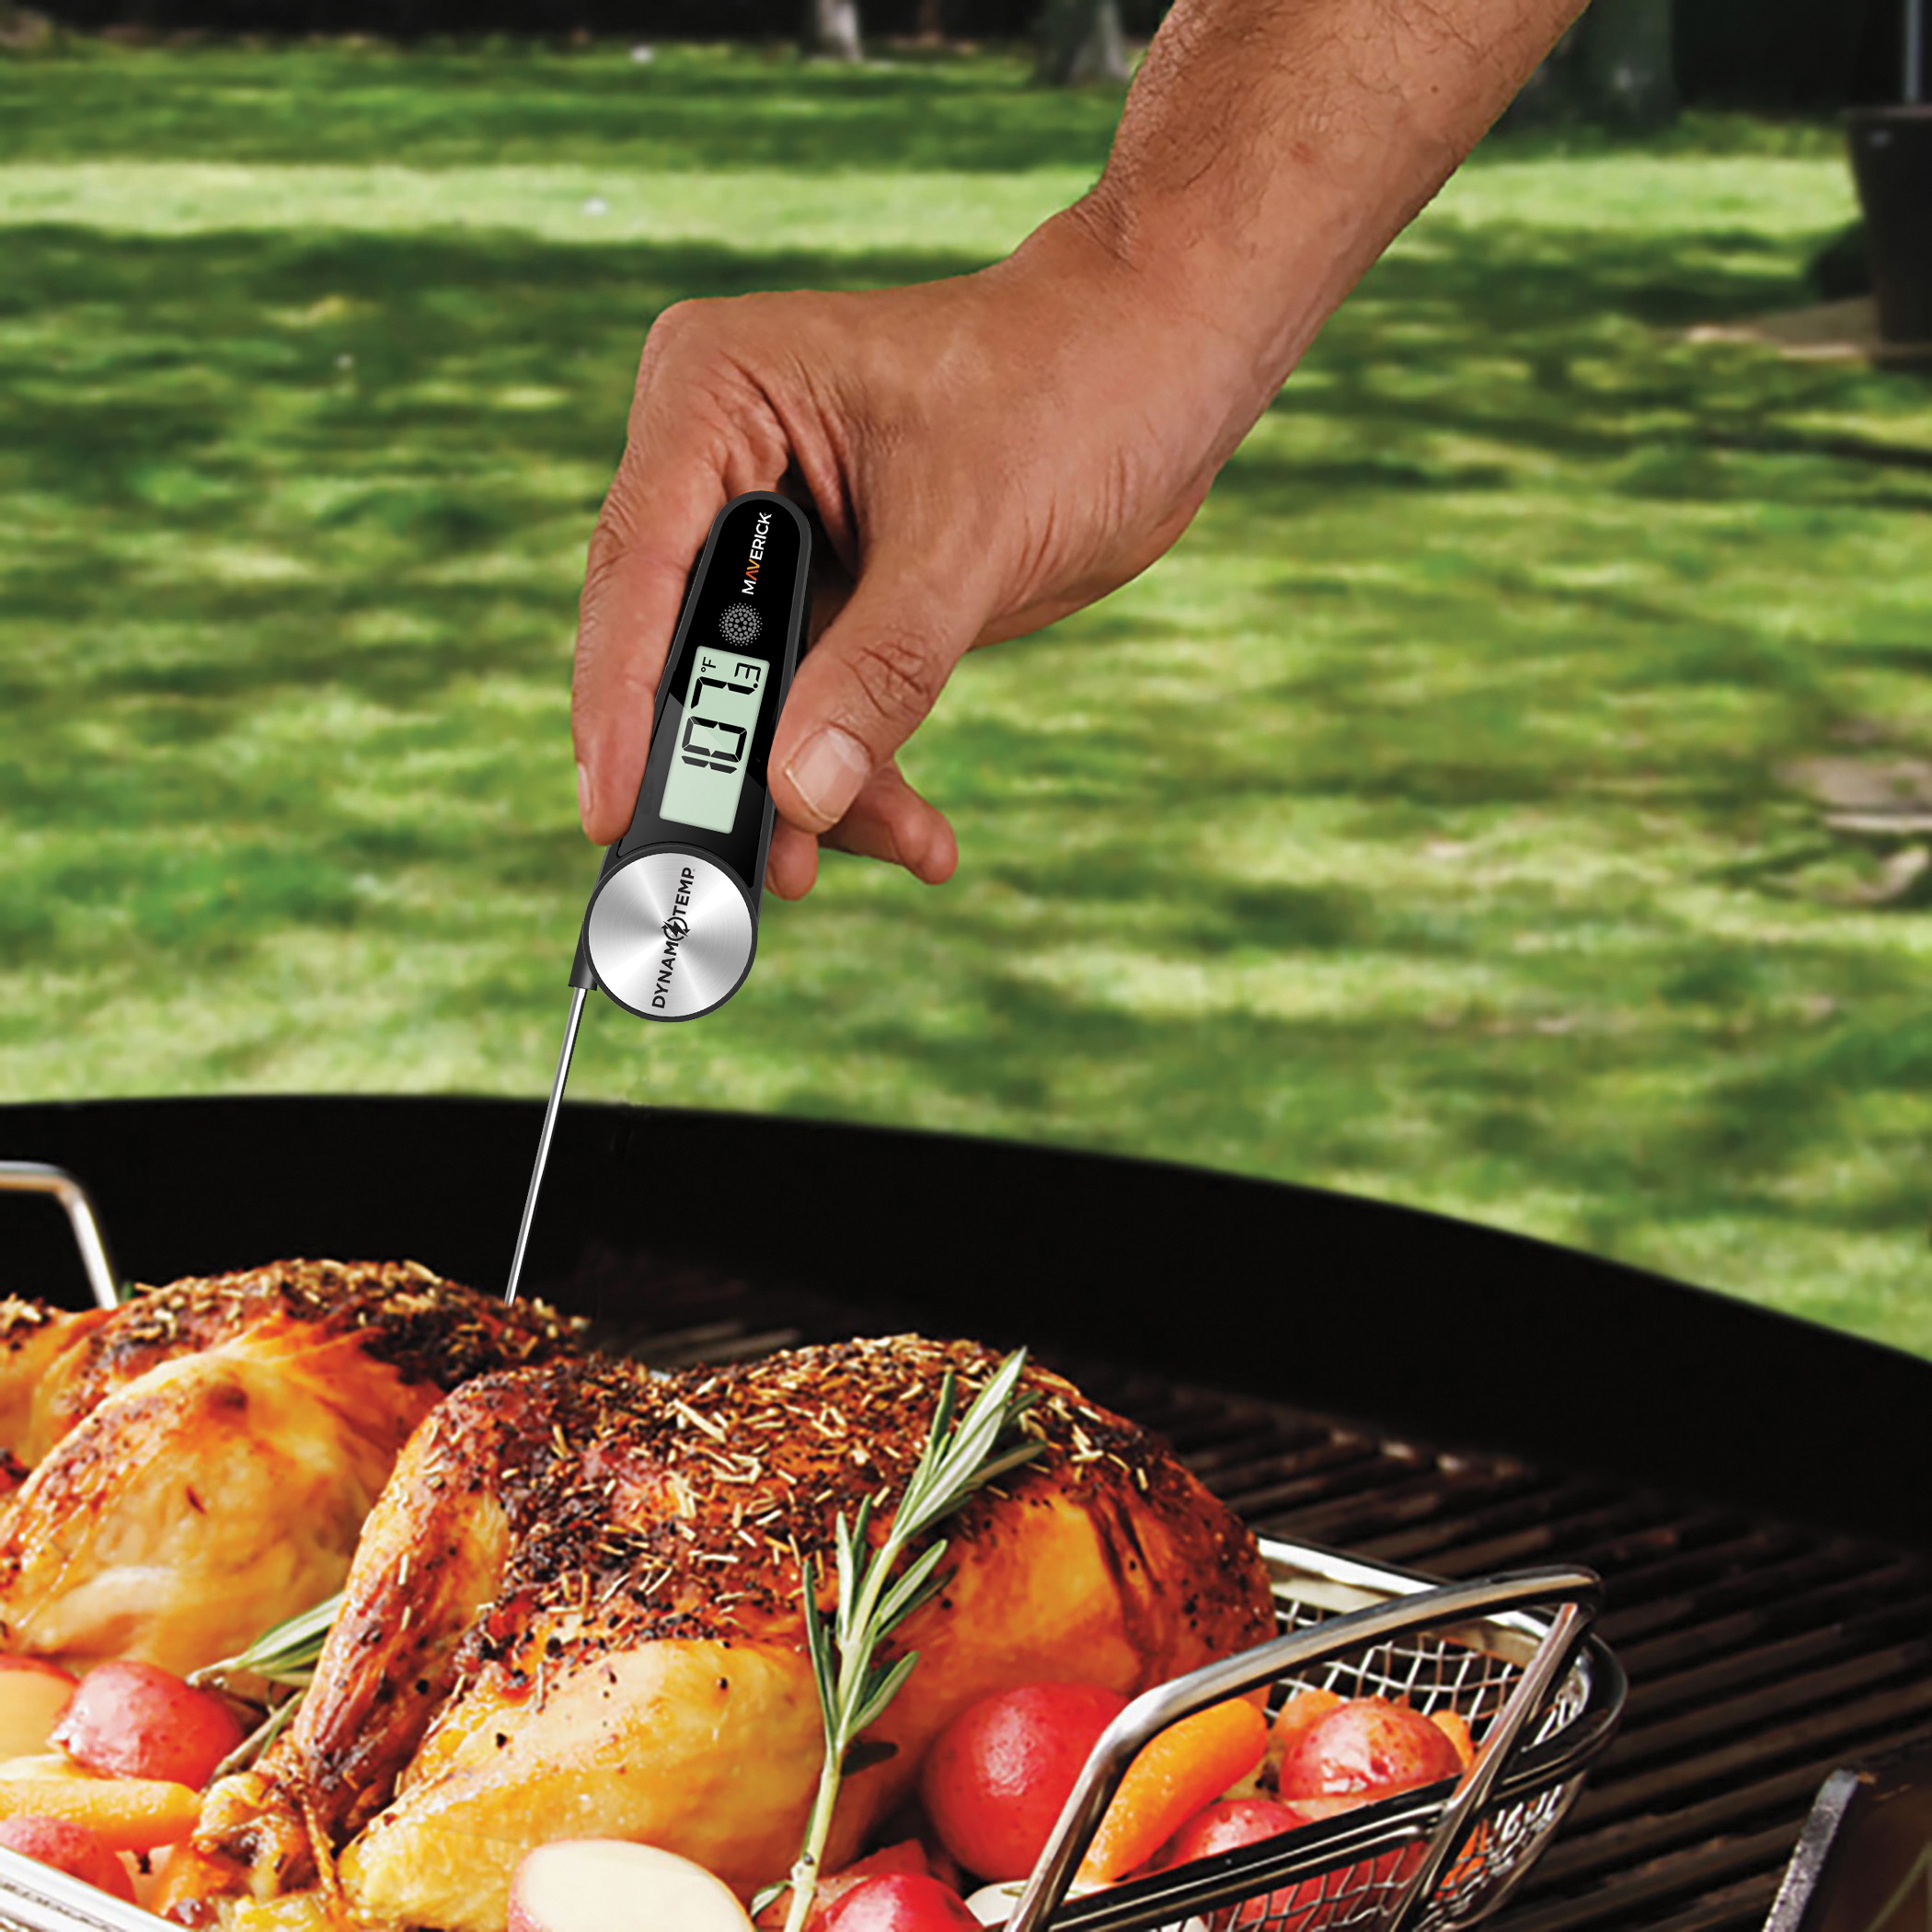 DGT-160 Digital Thermocouple Grill Thermometer